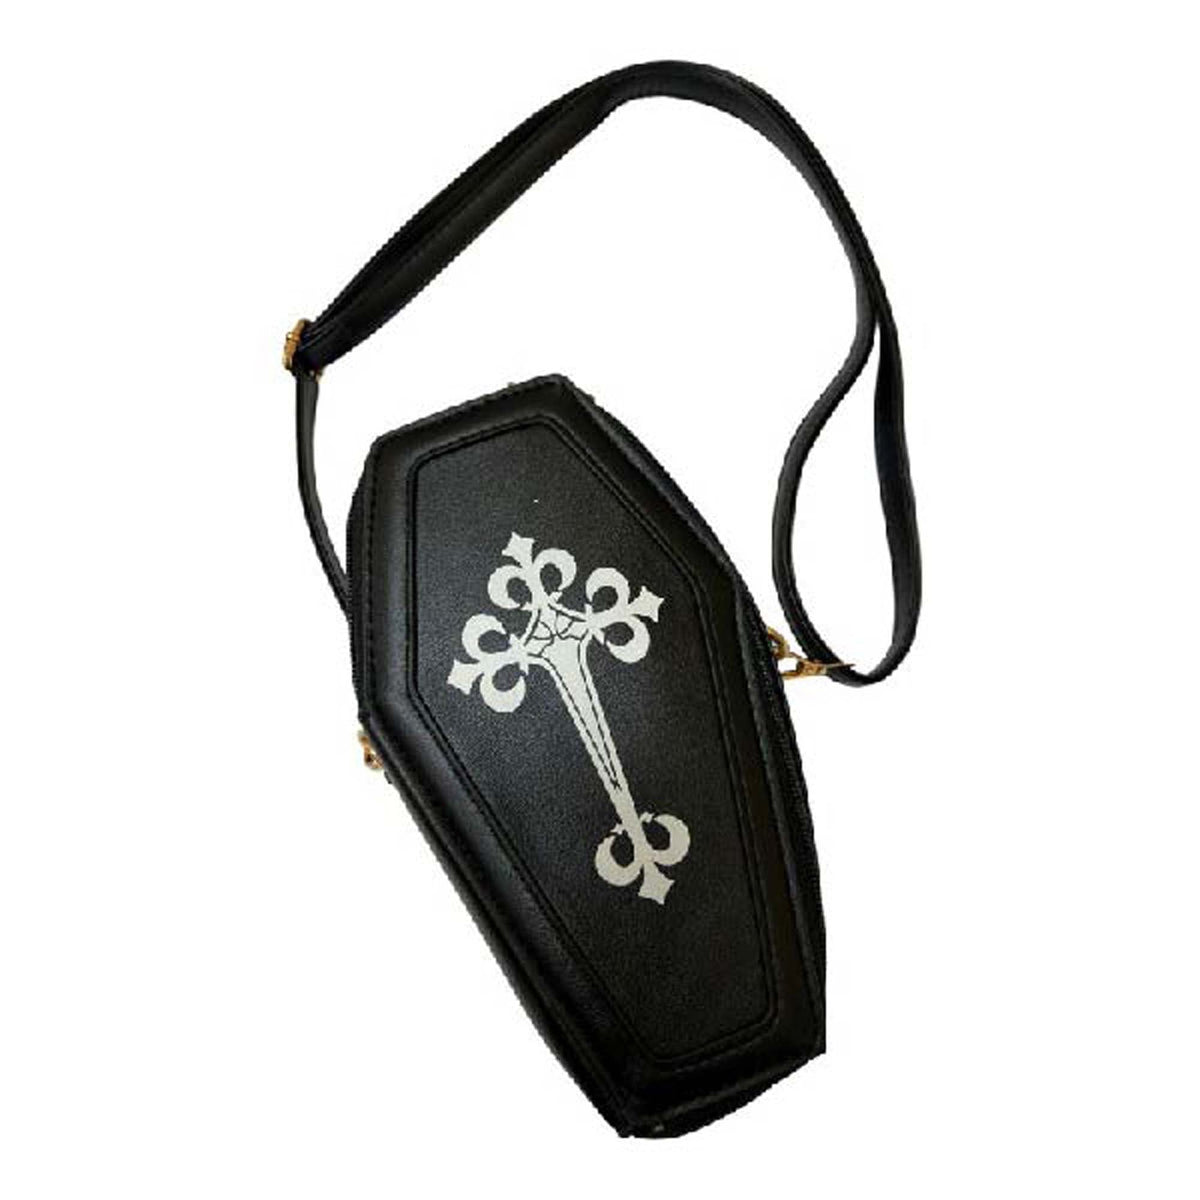 KBW GLOBAL CORP Costume Accessories Halloween Black Tombstone Purse, 1 Count 831687052699